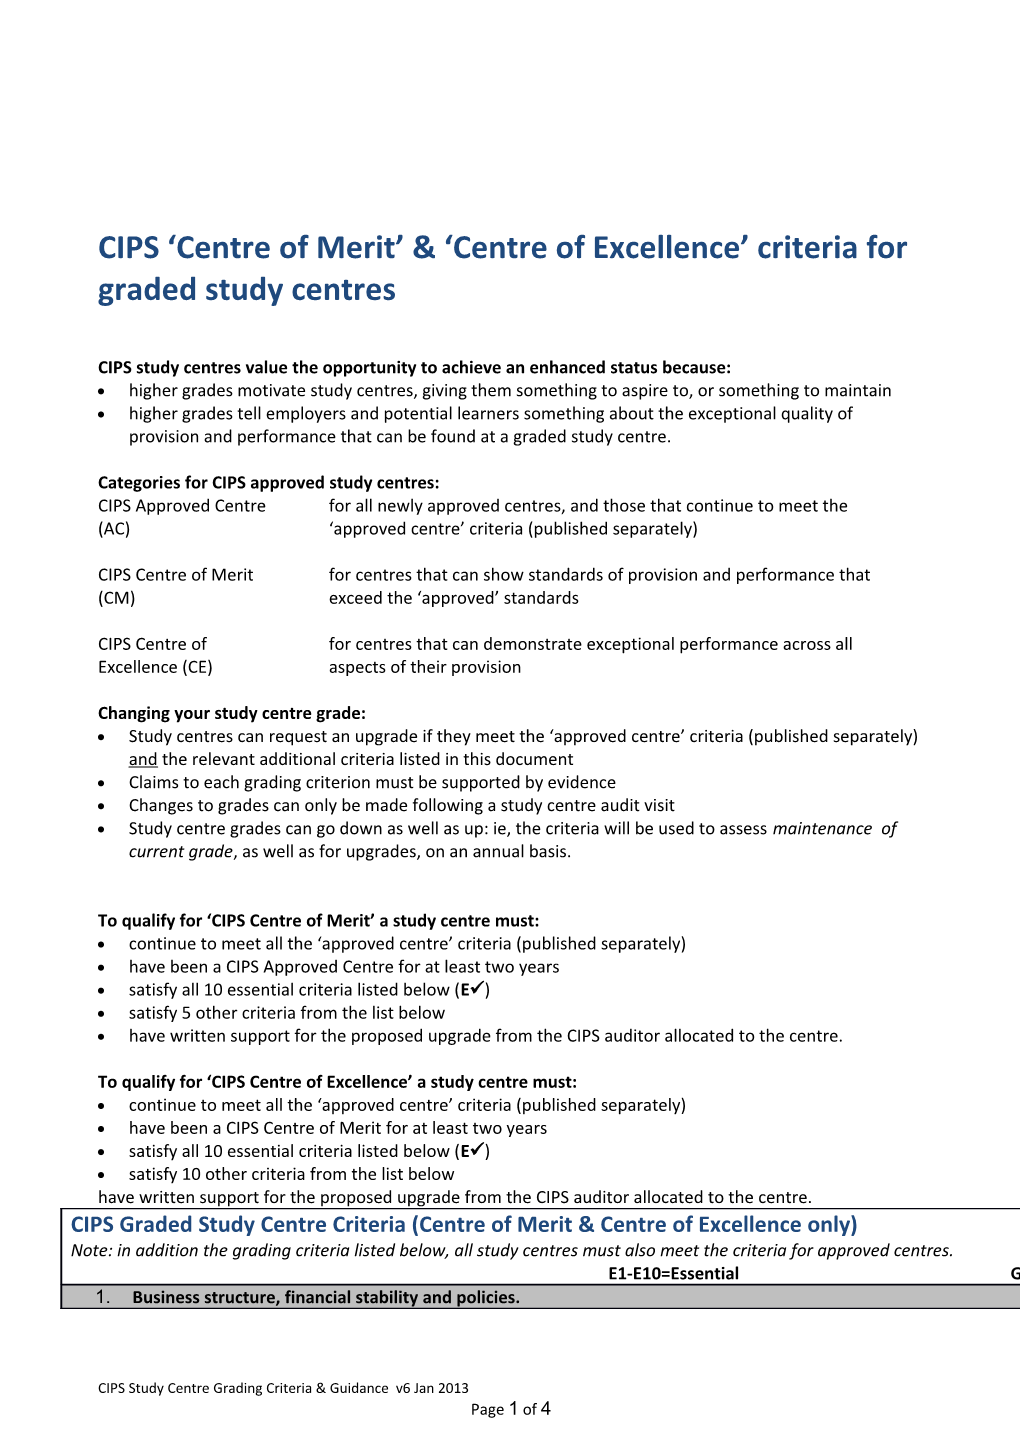 CIPS Centre of Merit & Centre of Excellence Criteria for Graded Study Centres